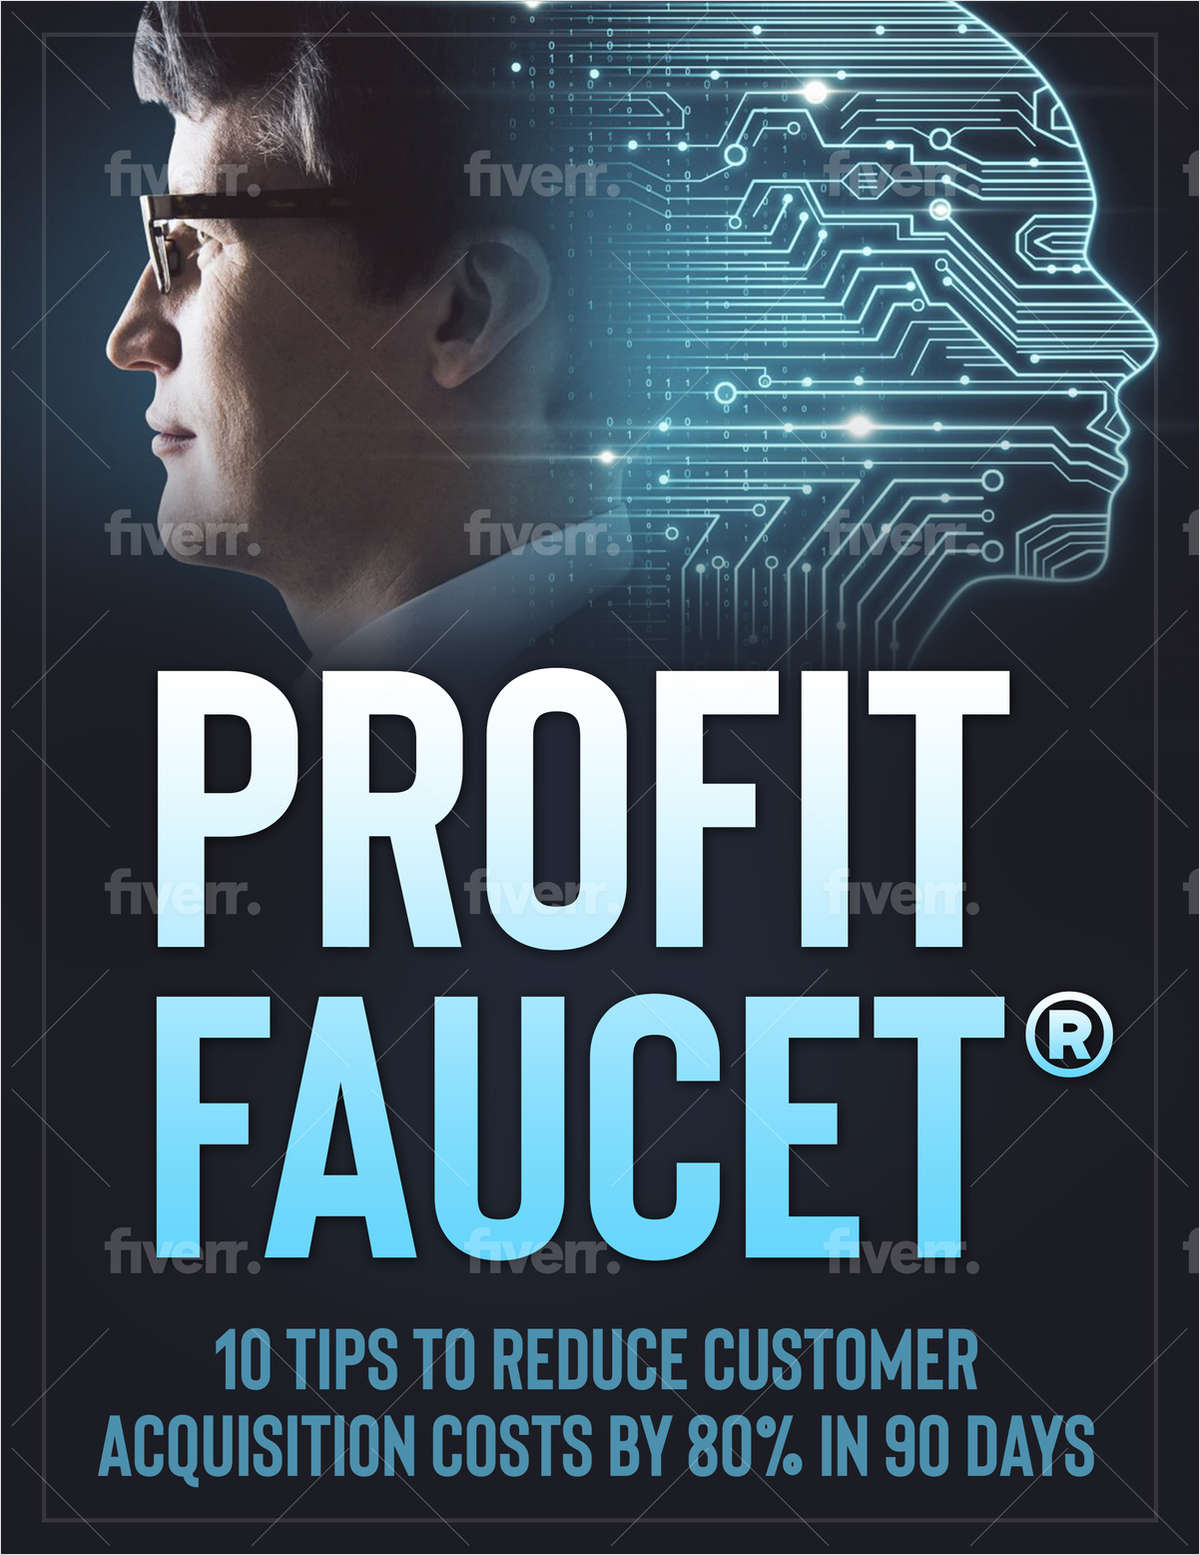 Profit Faucet: 10 Tip To Reduce Your Customer Acquisition Costs by 80% in 90 Days